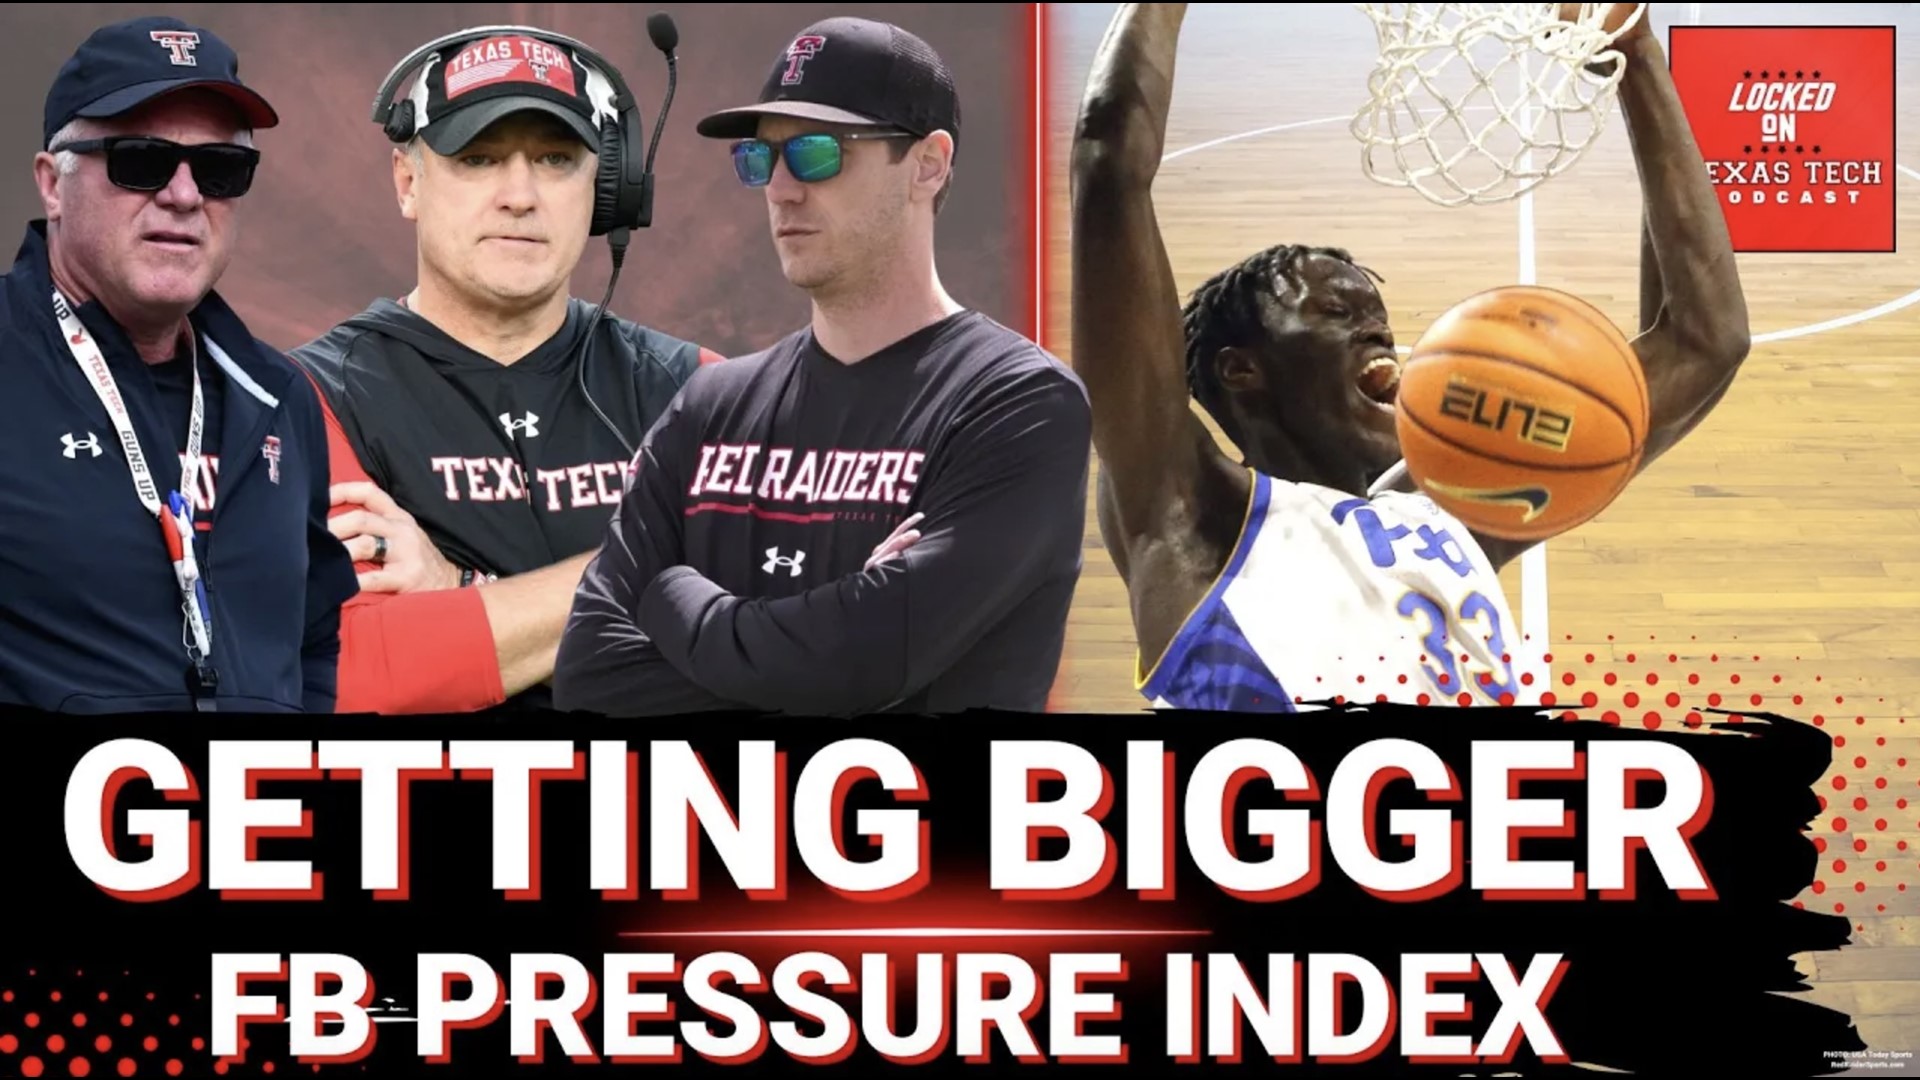 Today from Lubbock, TX, on Locked On Texas Tech:

- size incoming
- has Tech added starters this week?
- football pressure index